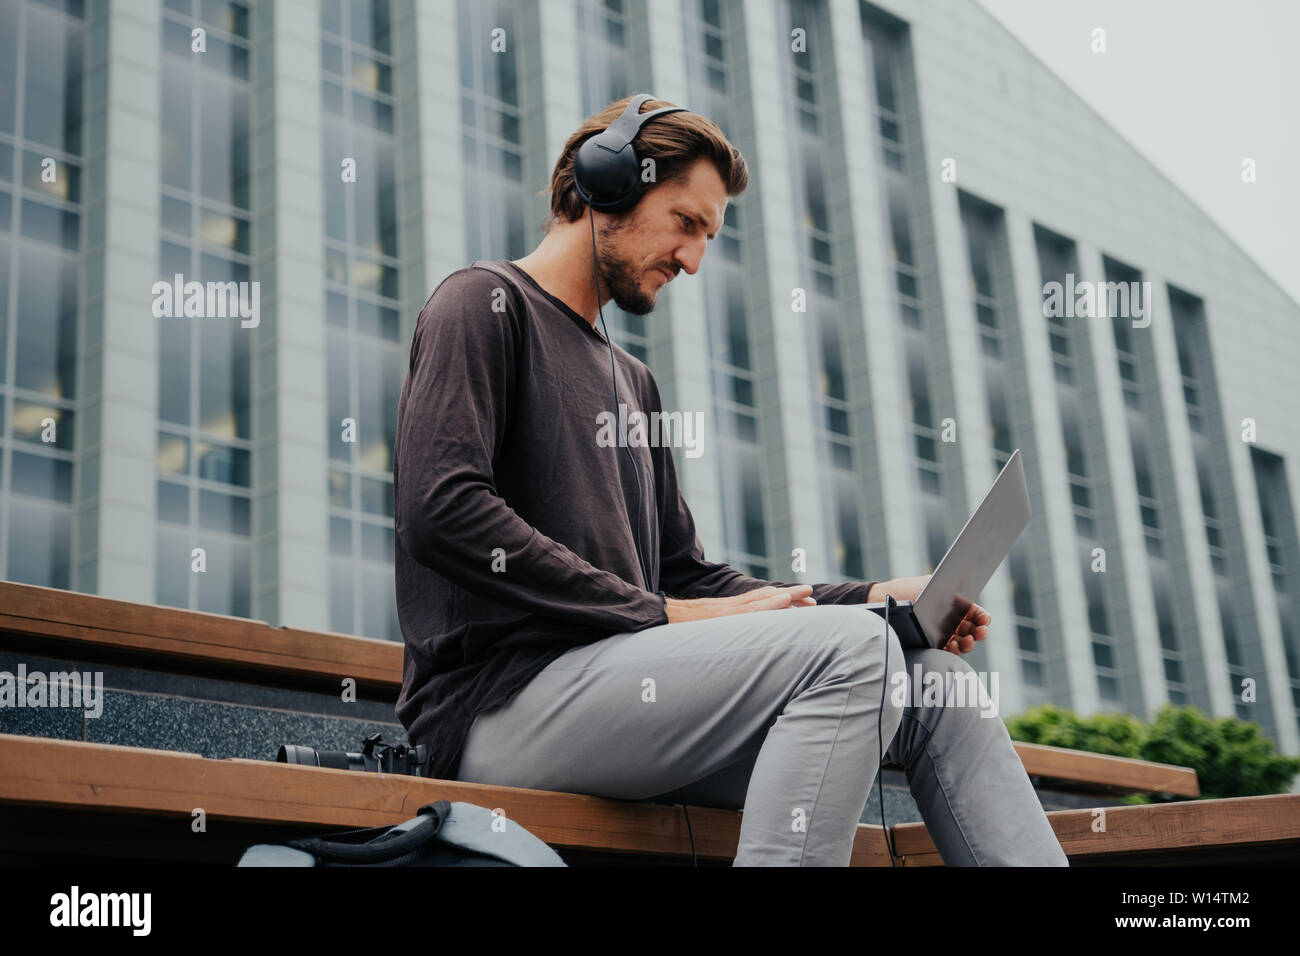 The freelance guy listens to music on headphones, backpac and works on a laptop in the center of a big city. Stock Photo